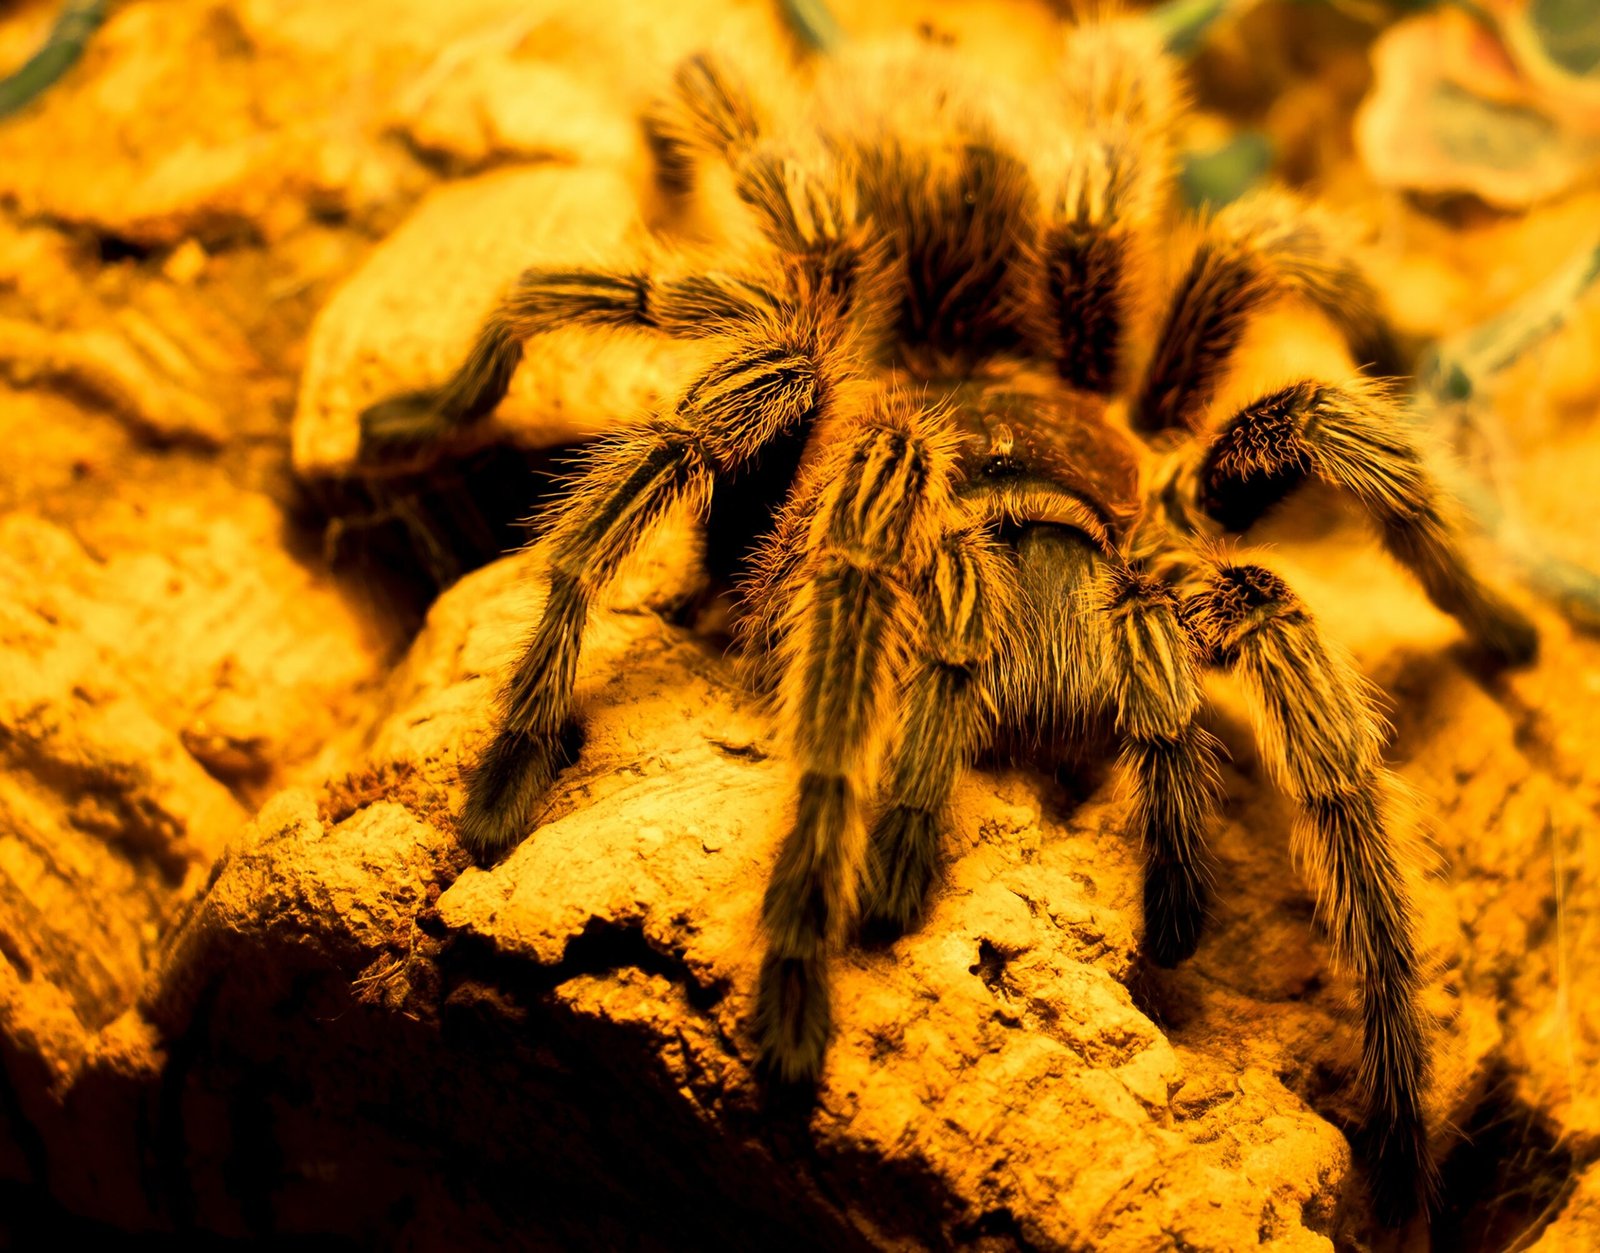 How Do I Prevent The Male Tarantula From Becoming Injured During Mating?